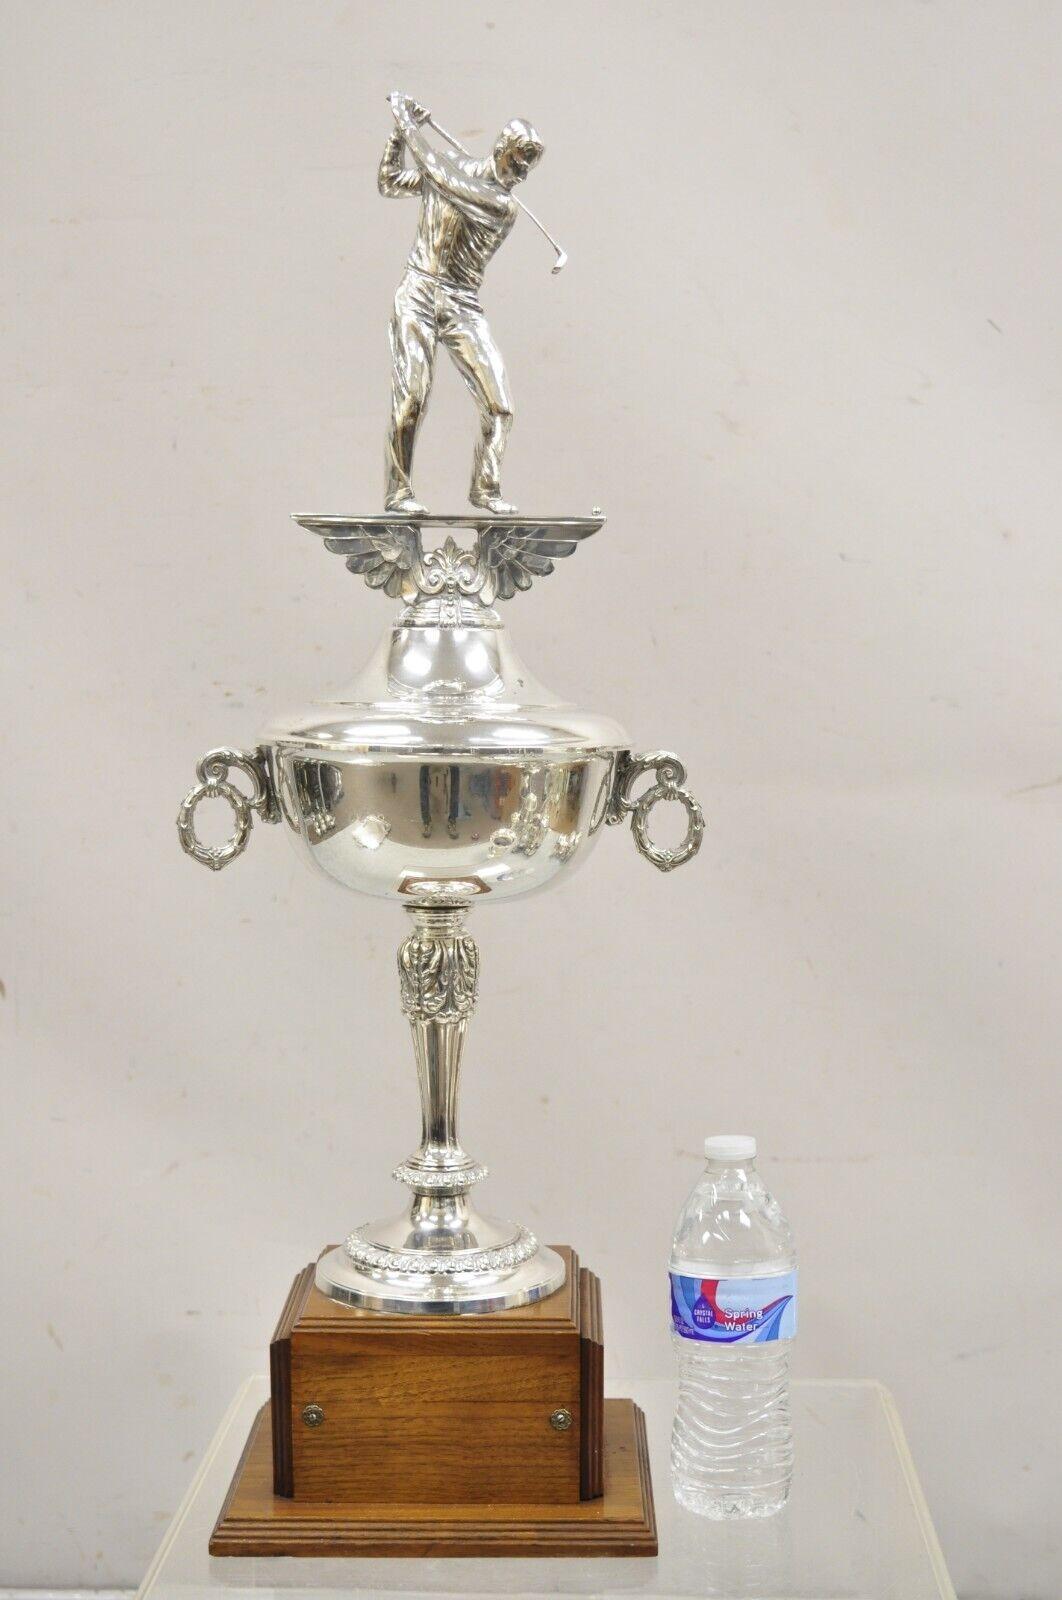 Vintage Art Deco Style Large Silver Plated Figural Golf Tournament Trophy Cup Award. 